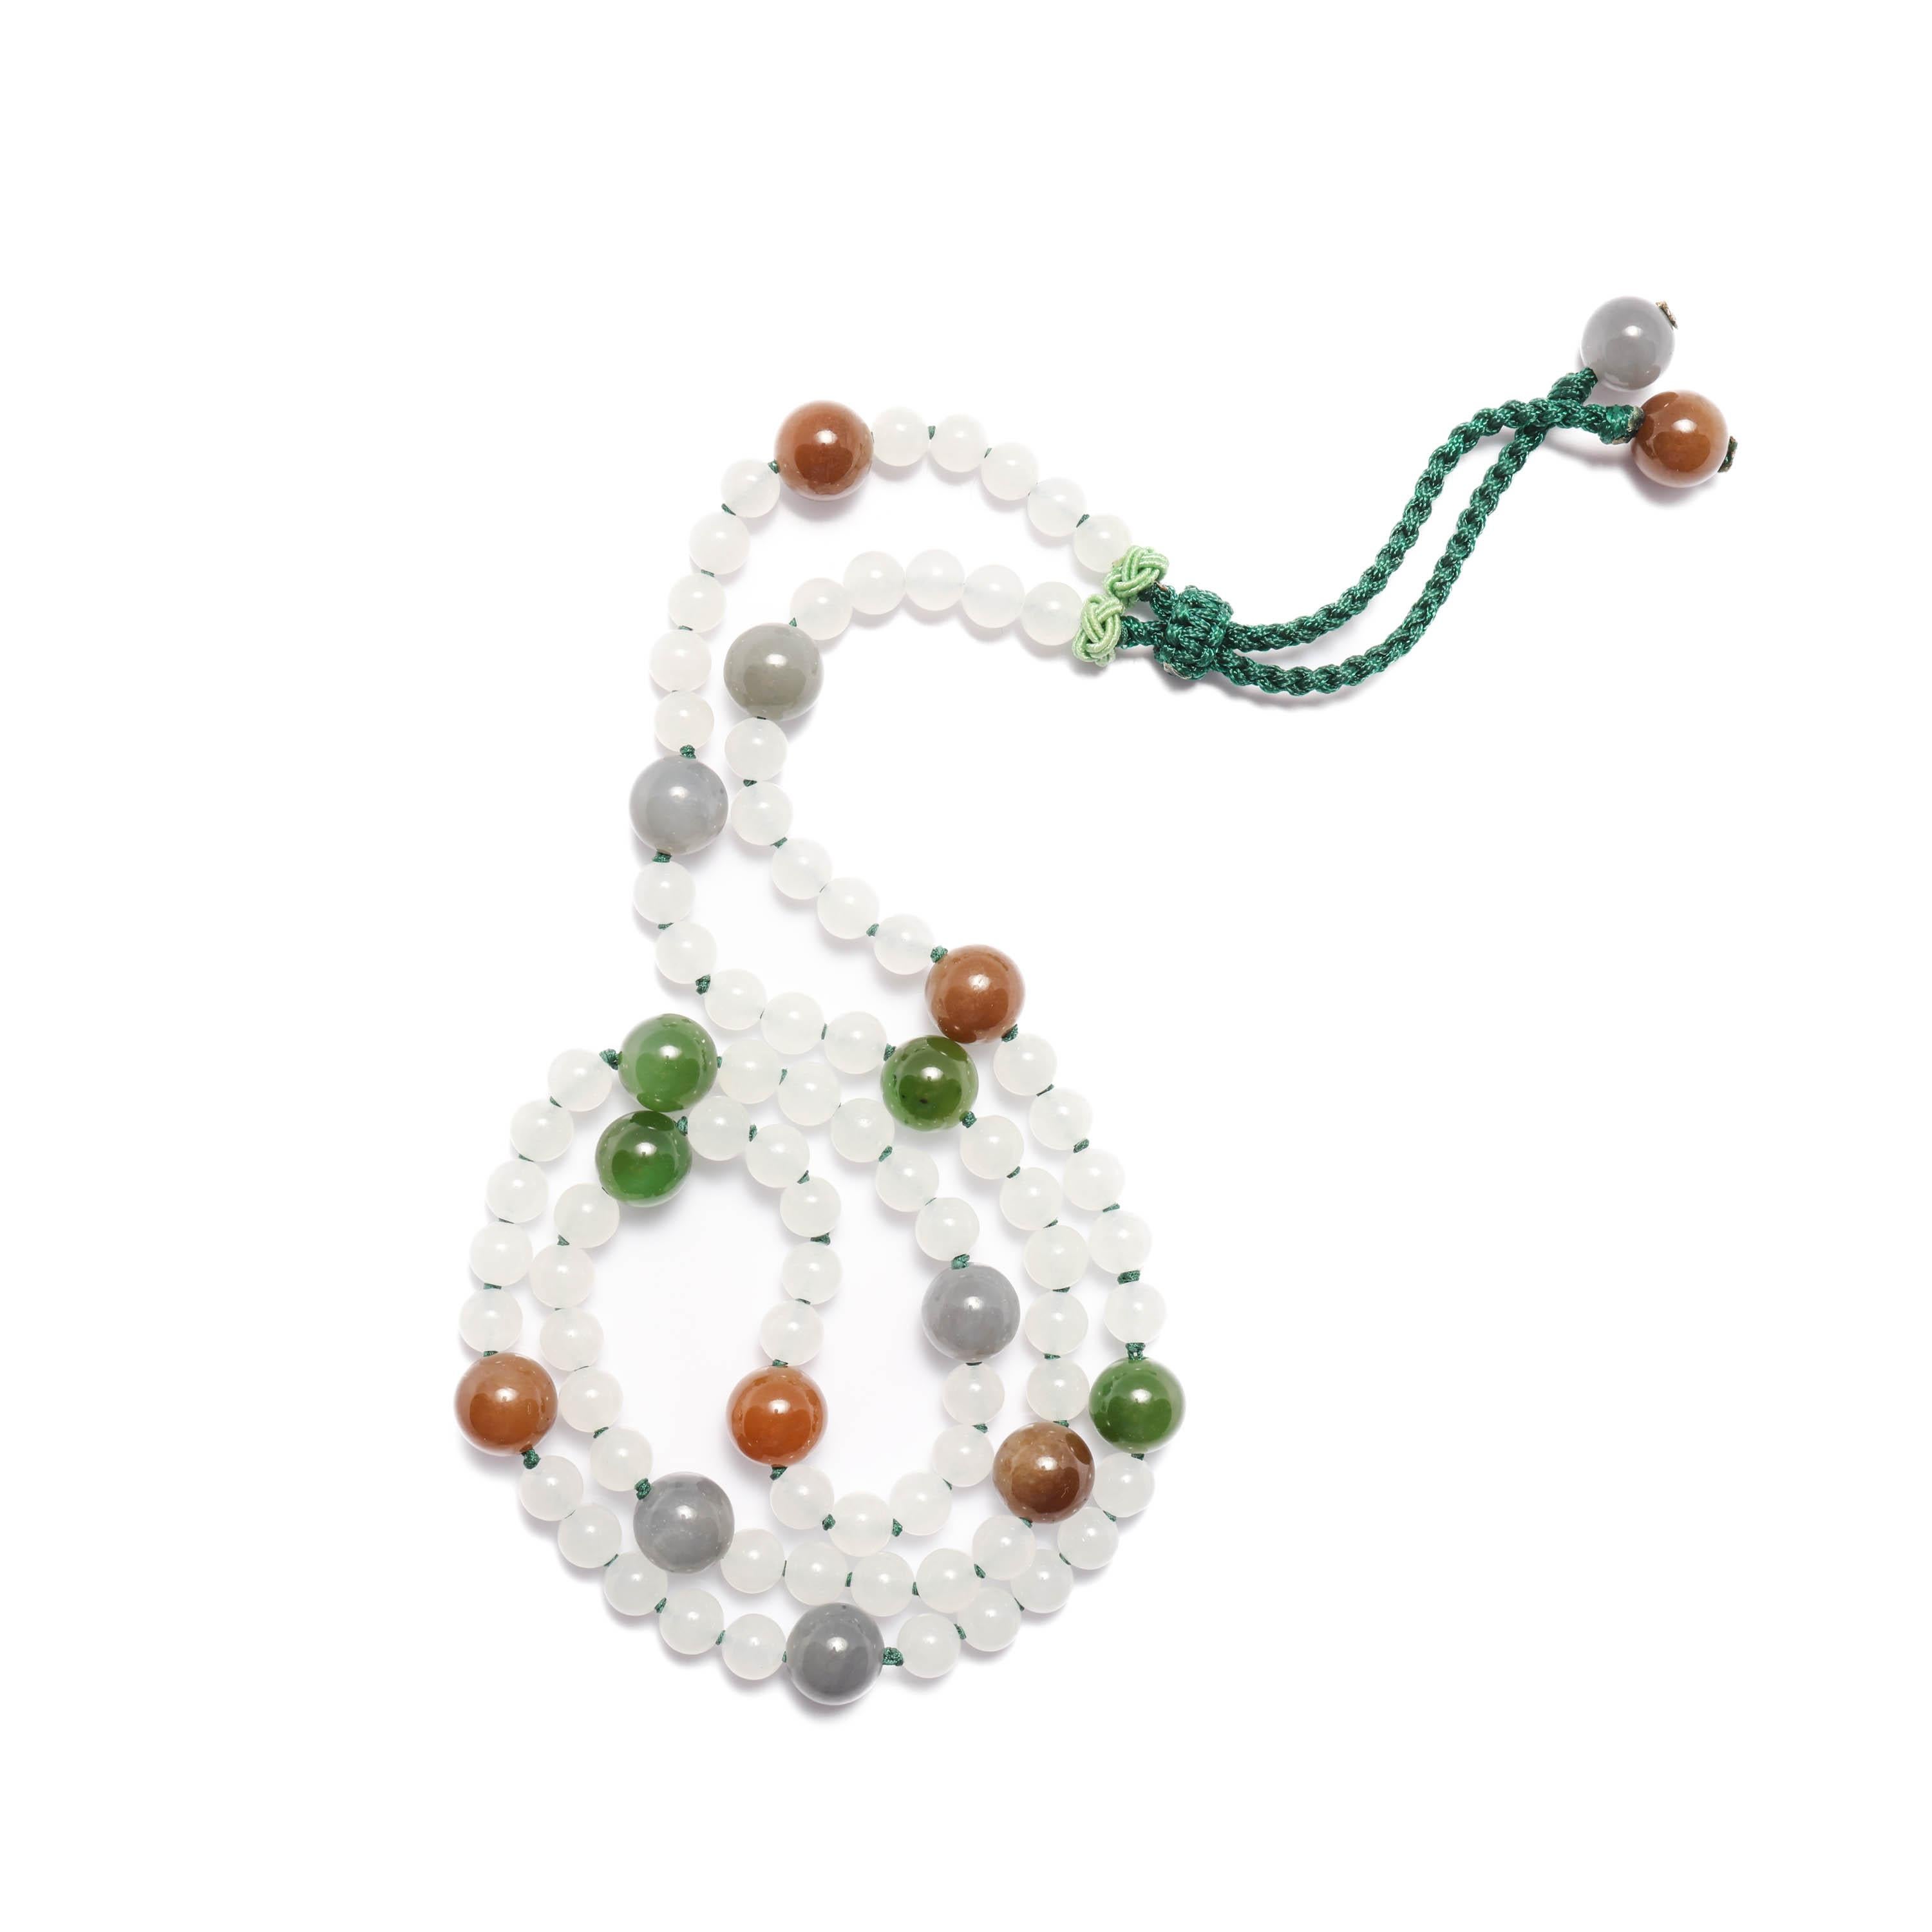 This gorgeous handmade necklace looks to be a strand of fine jadeite jade; the high translucency of the beads, the rich and varied coloring; all traits we associate with jadeite. But these beads are natural and untreated nephrite jade. Typically, we